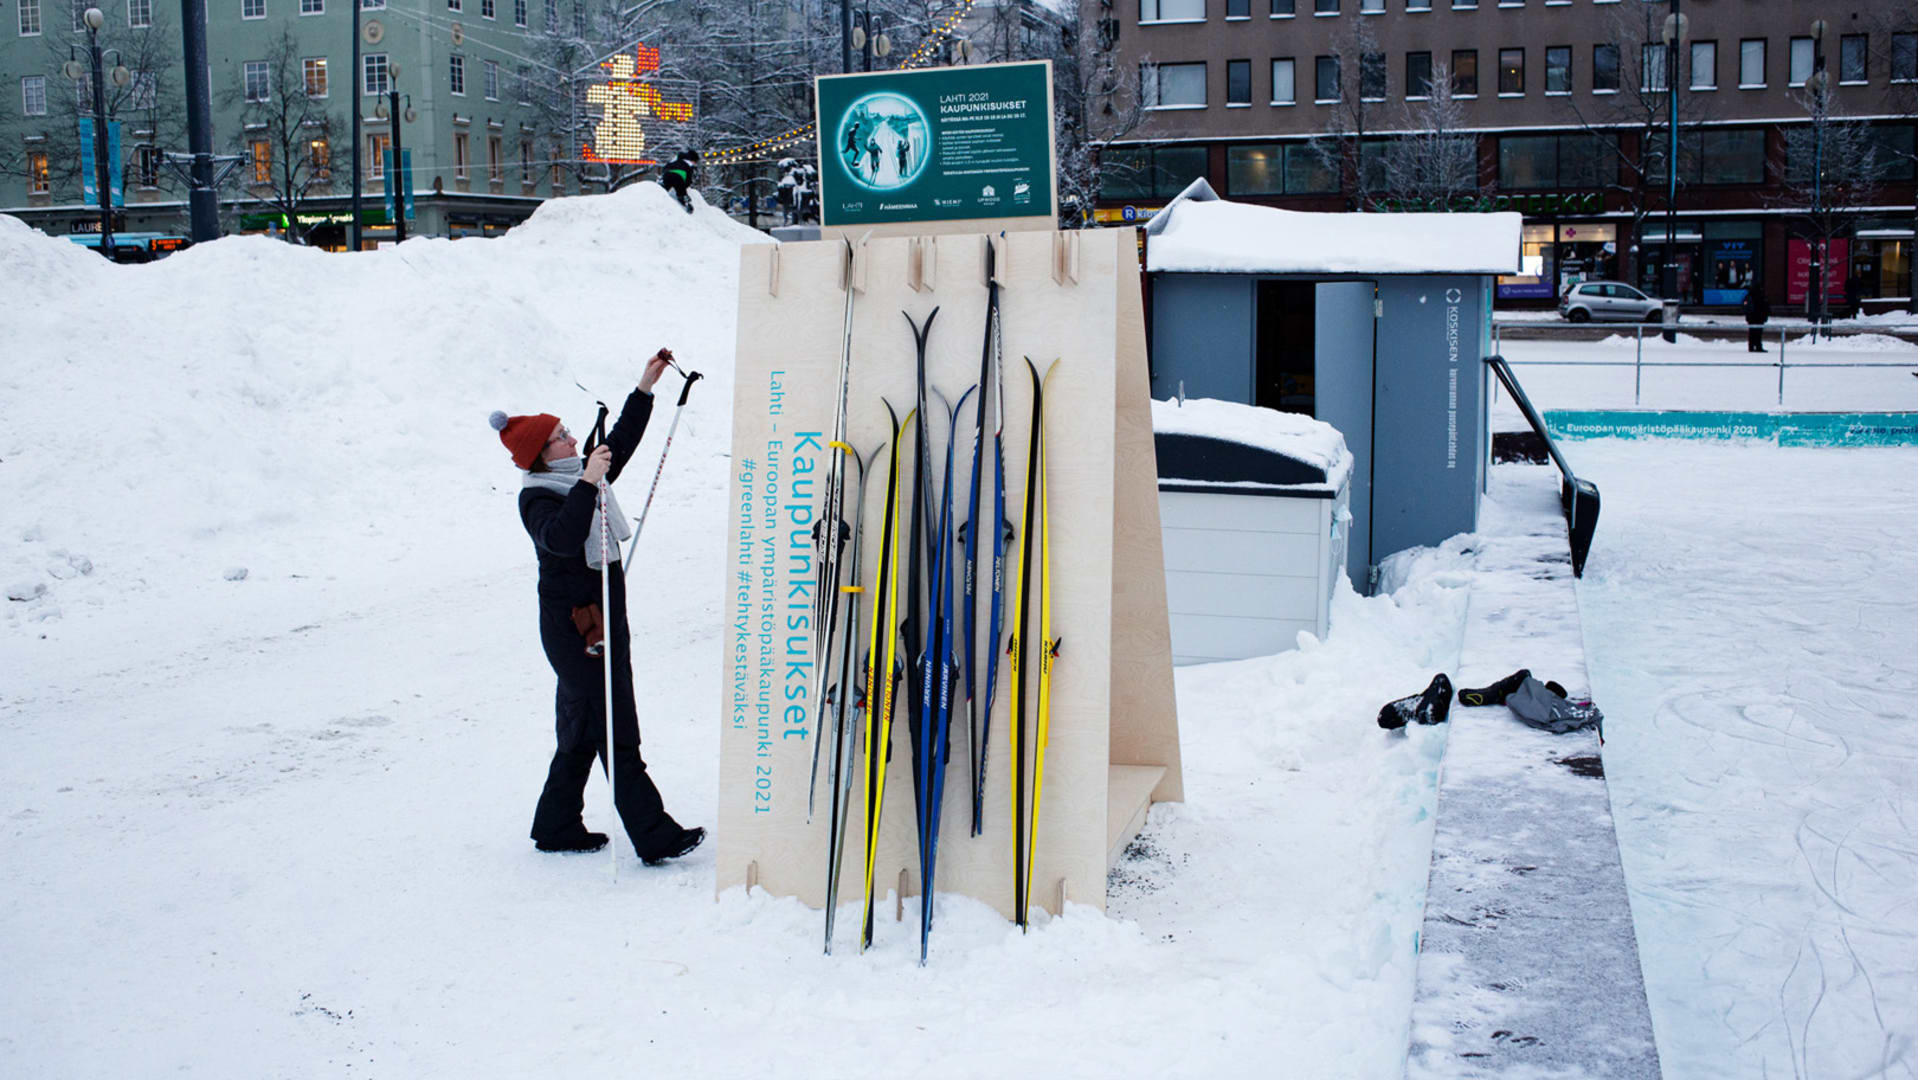 This Finnish city just launched the world’s first urban ski-sharing program